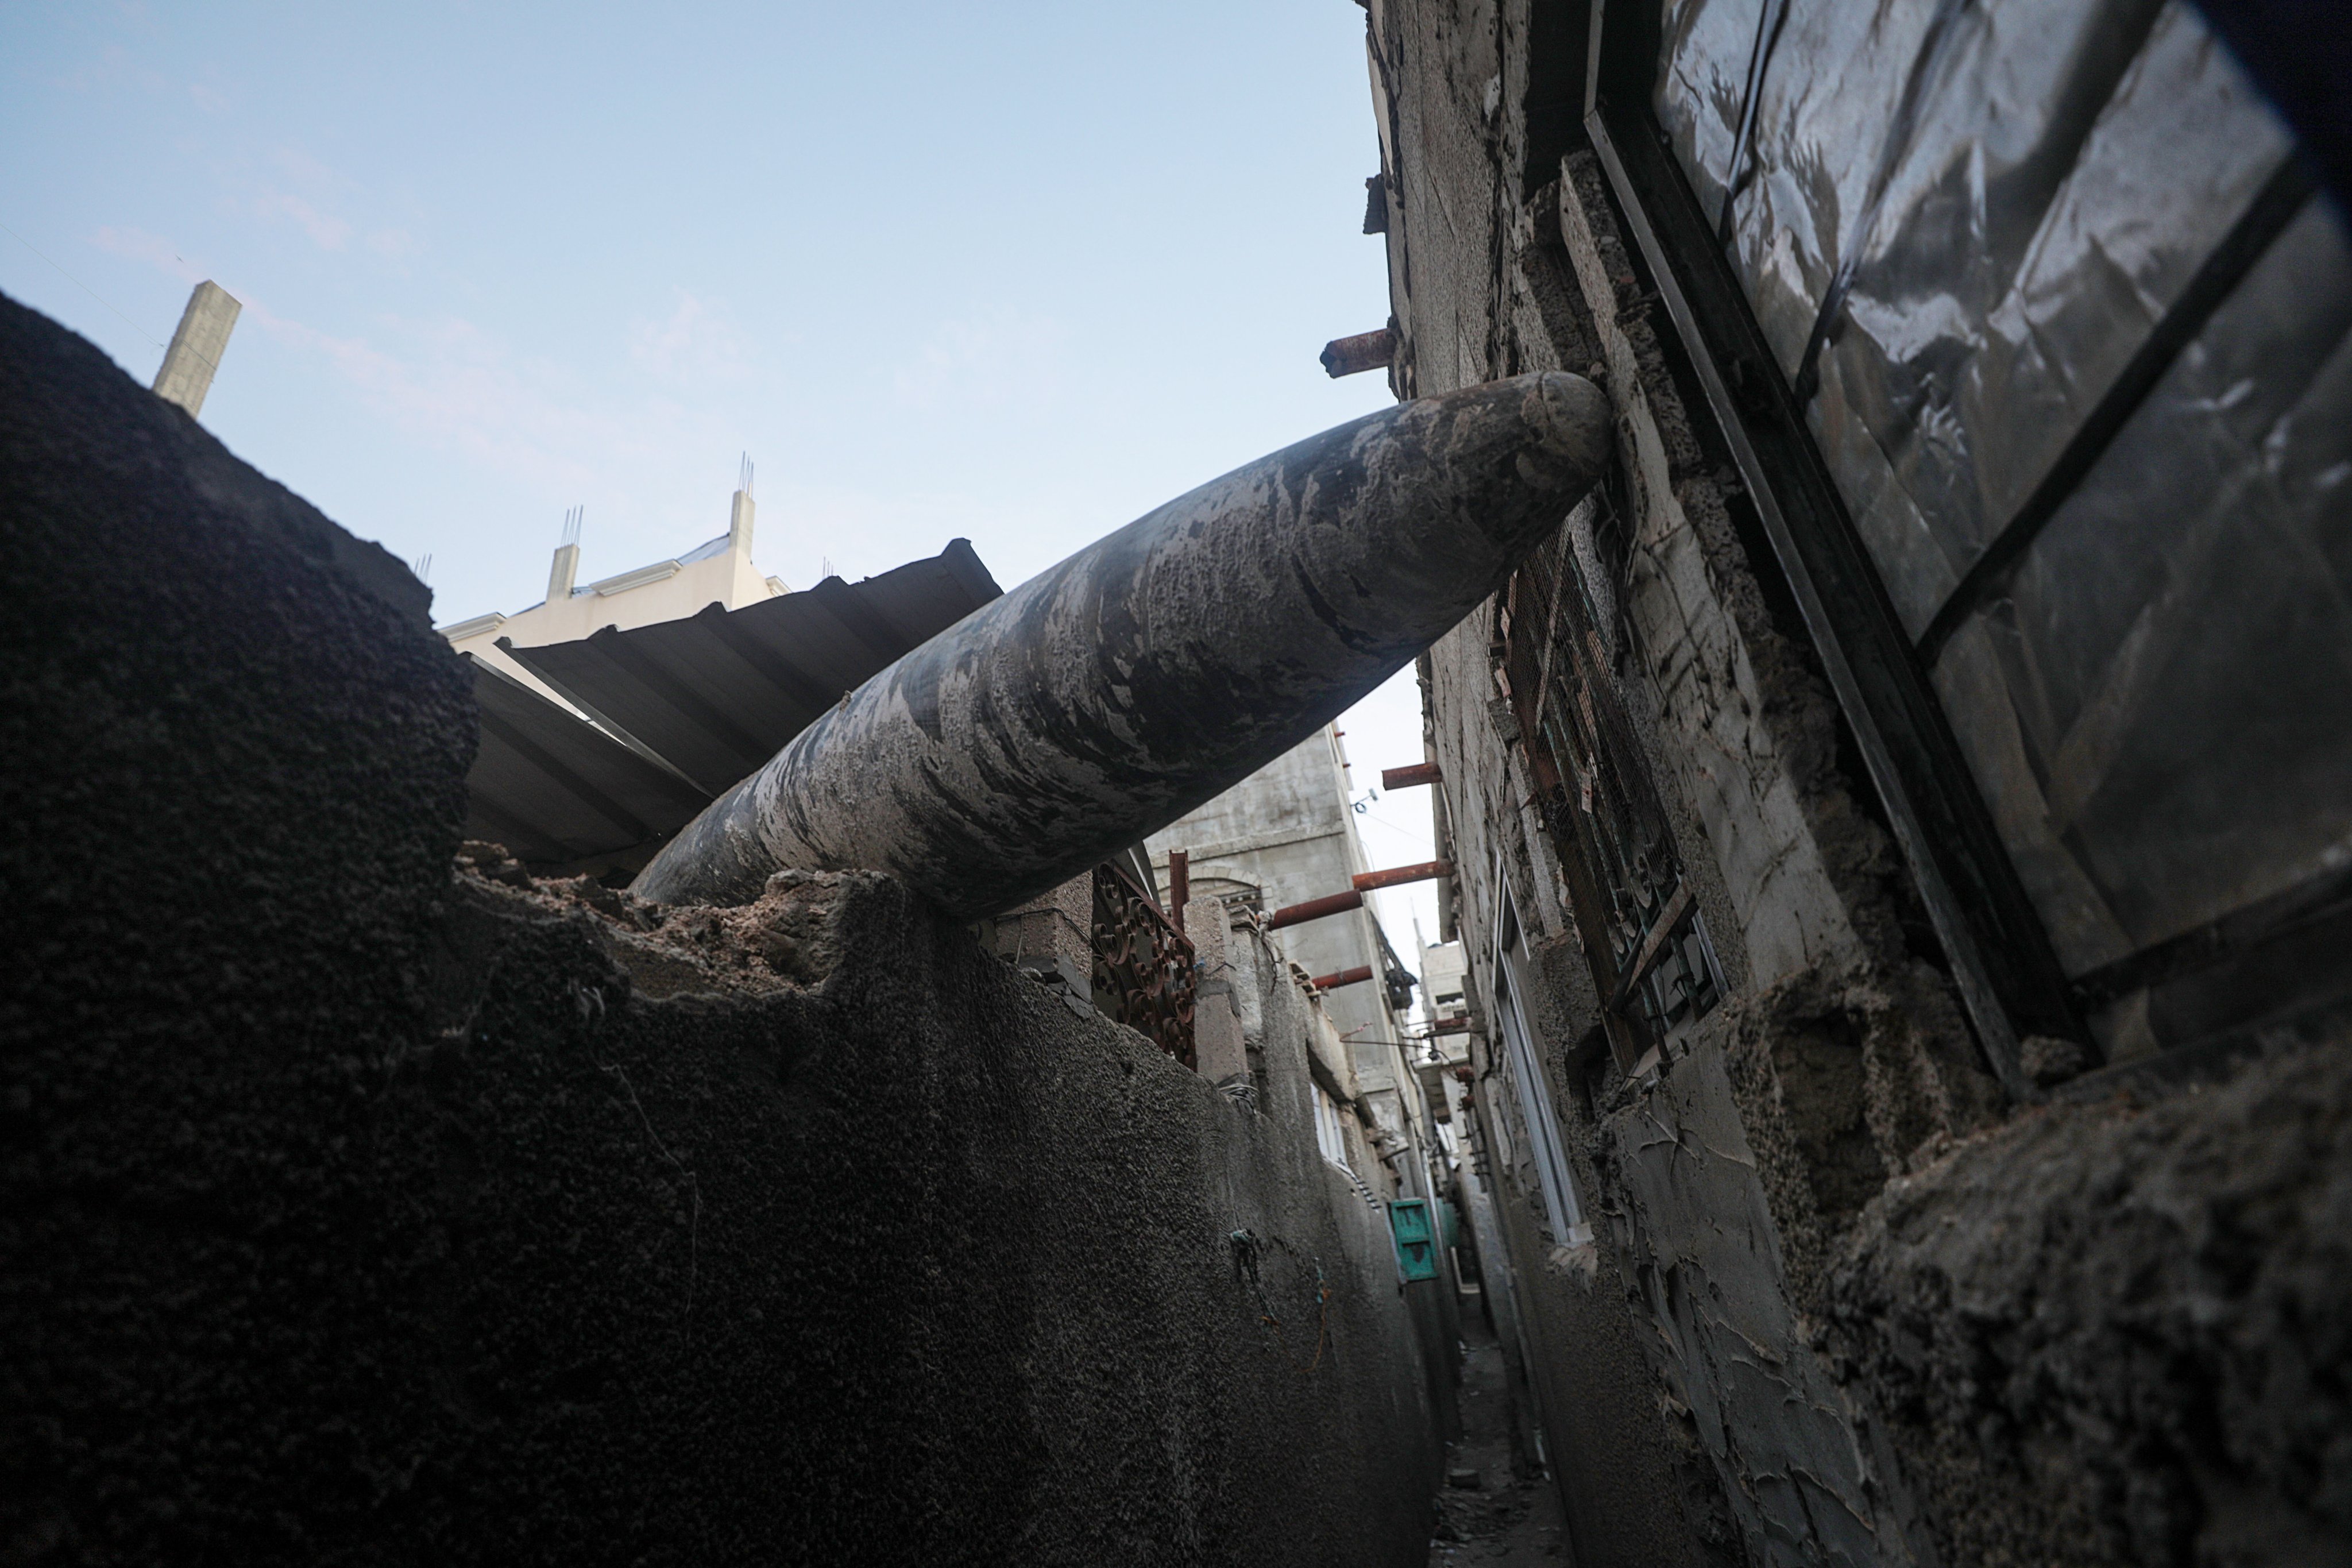 An unexploded missile stuck between two homes in Al Nusairat refugee camp in the southern Gaza Strip. Photo: EPA-EFE